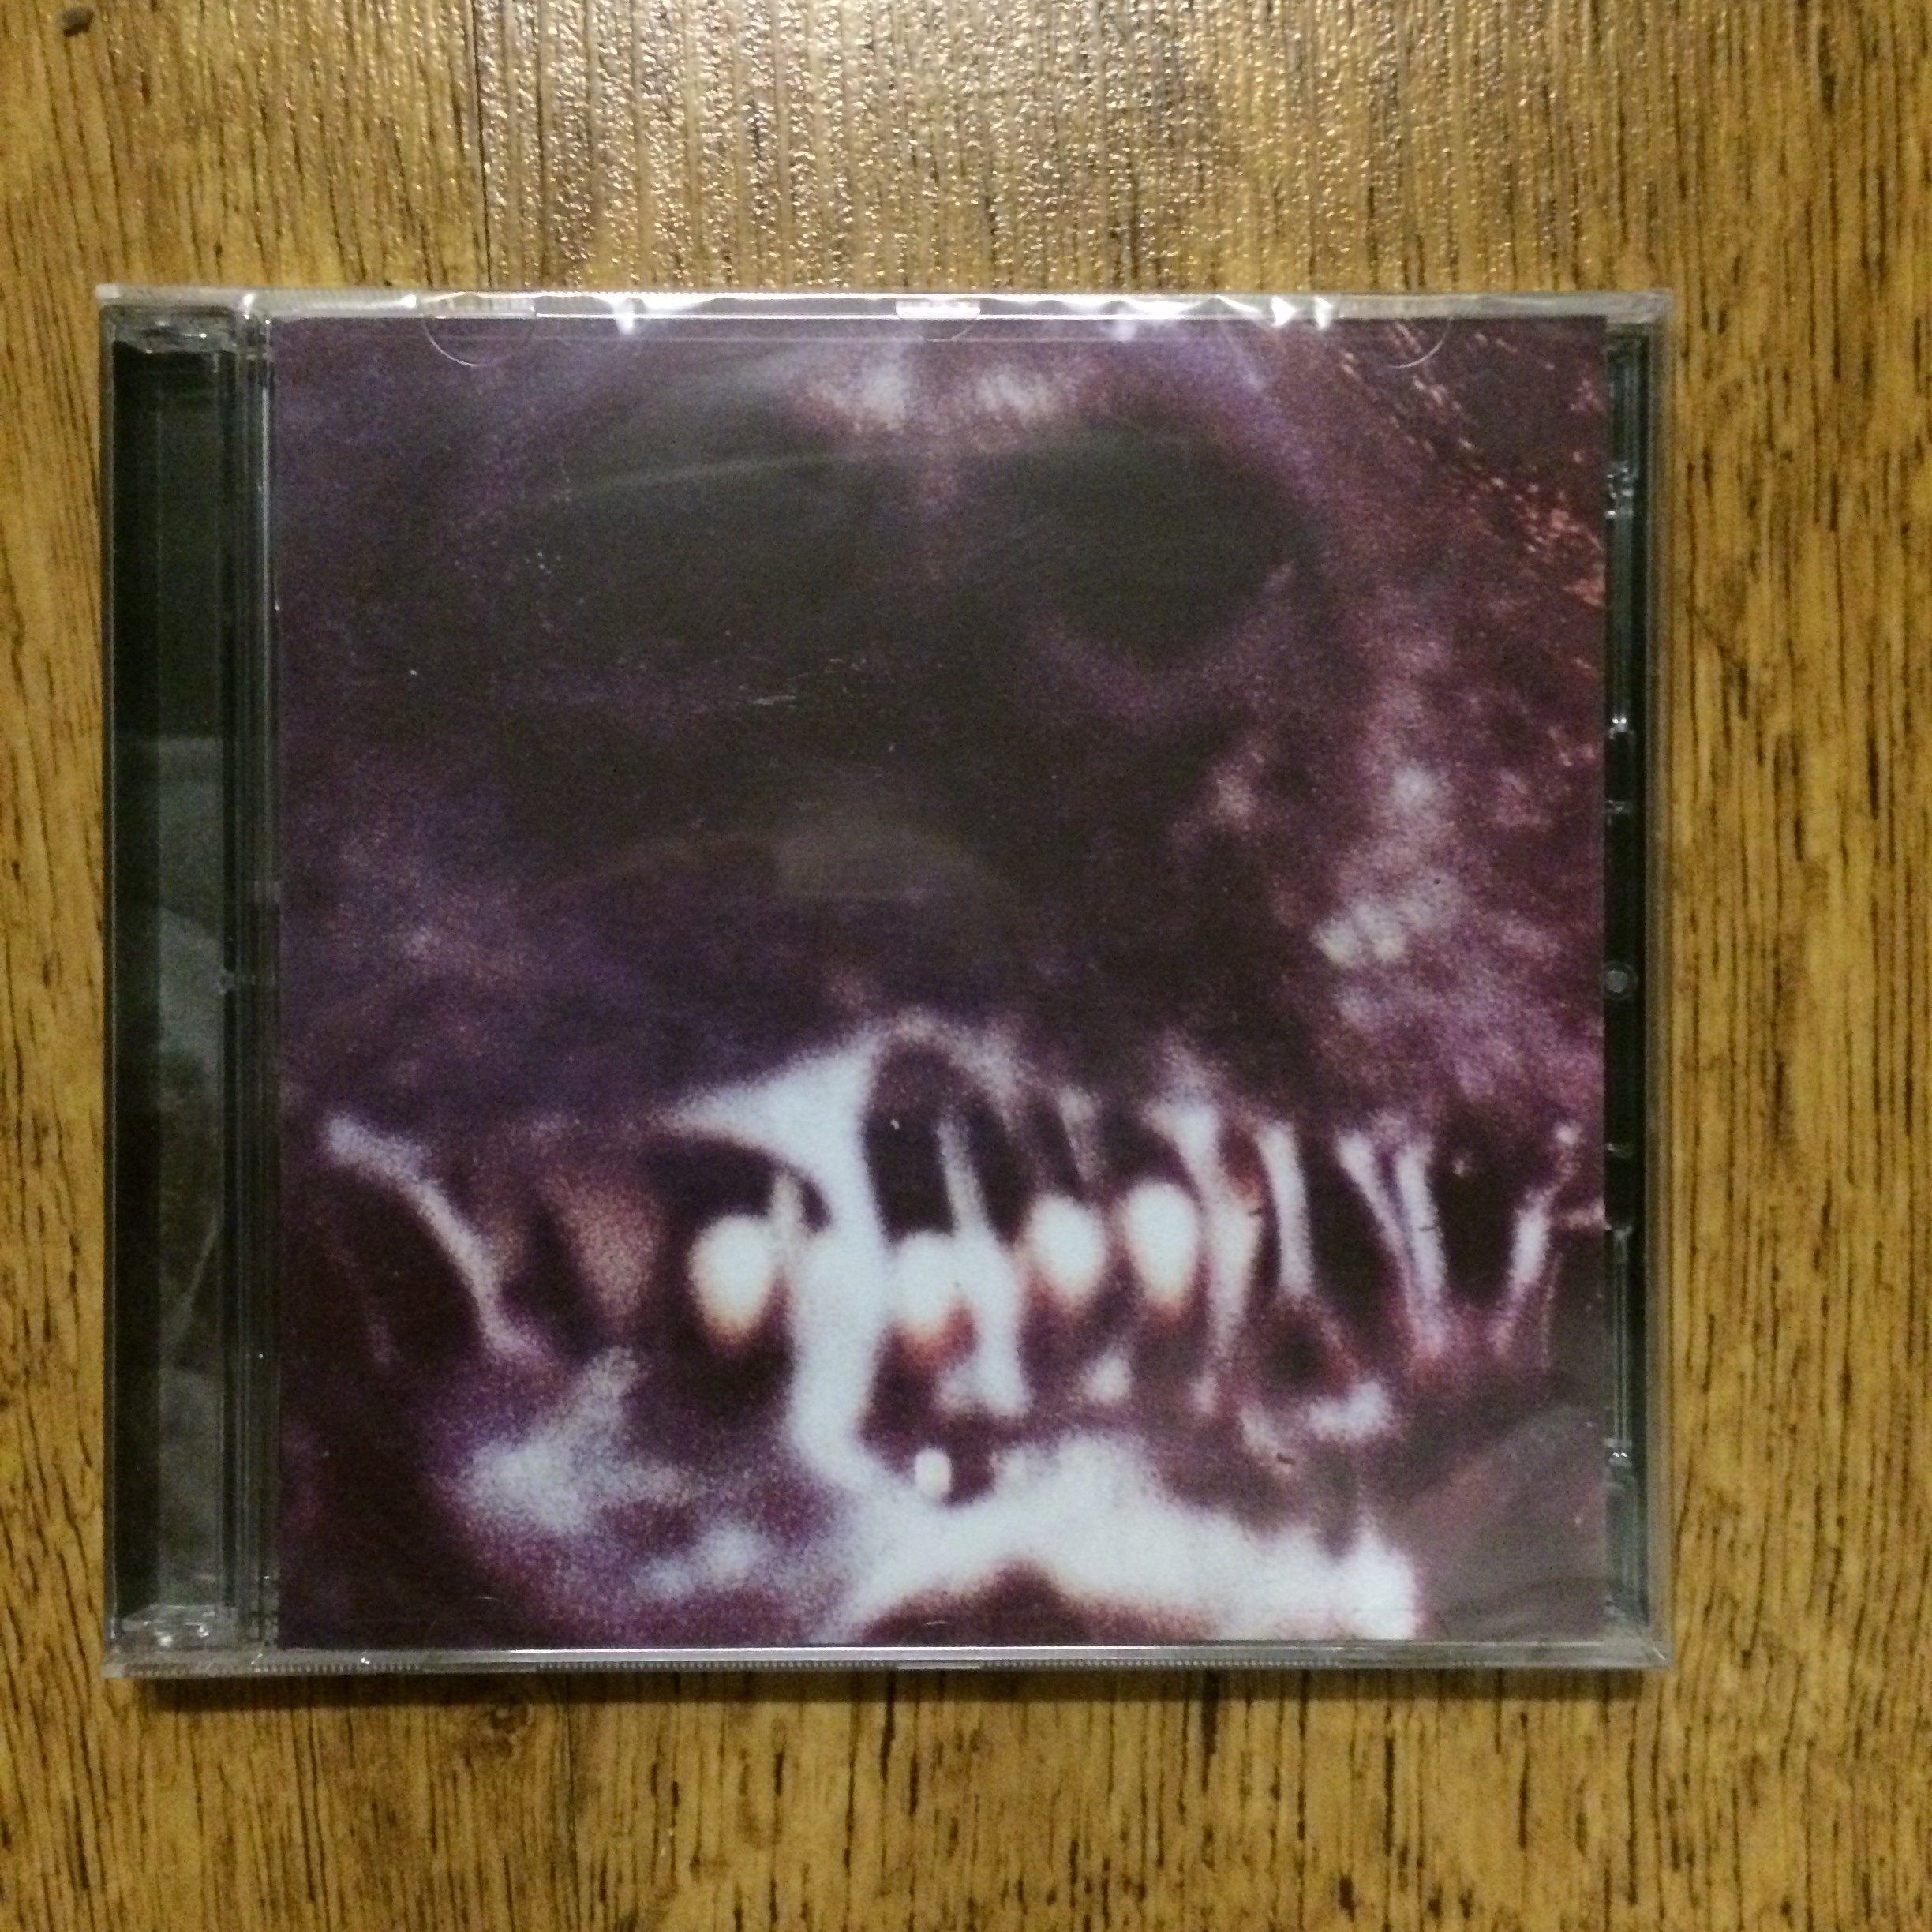 Photo of the Genocide - "St." CD